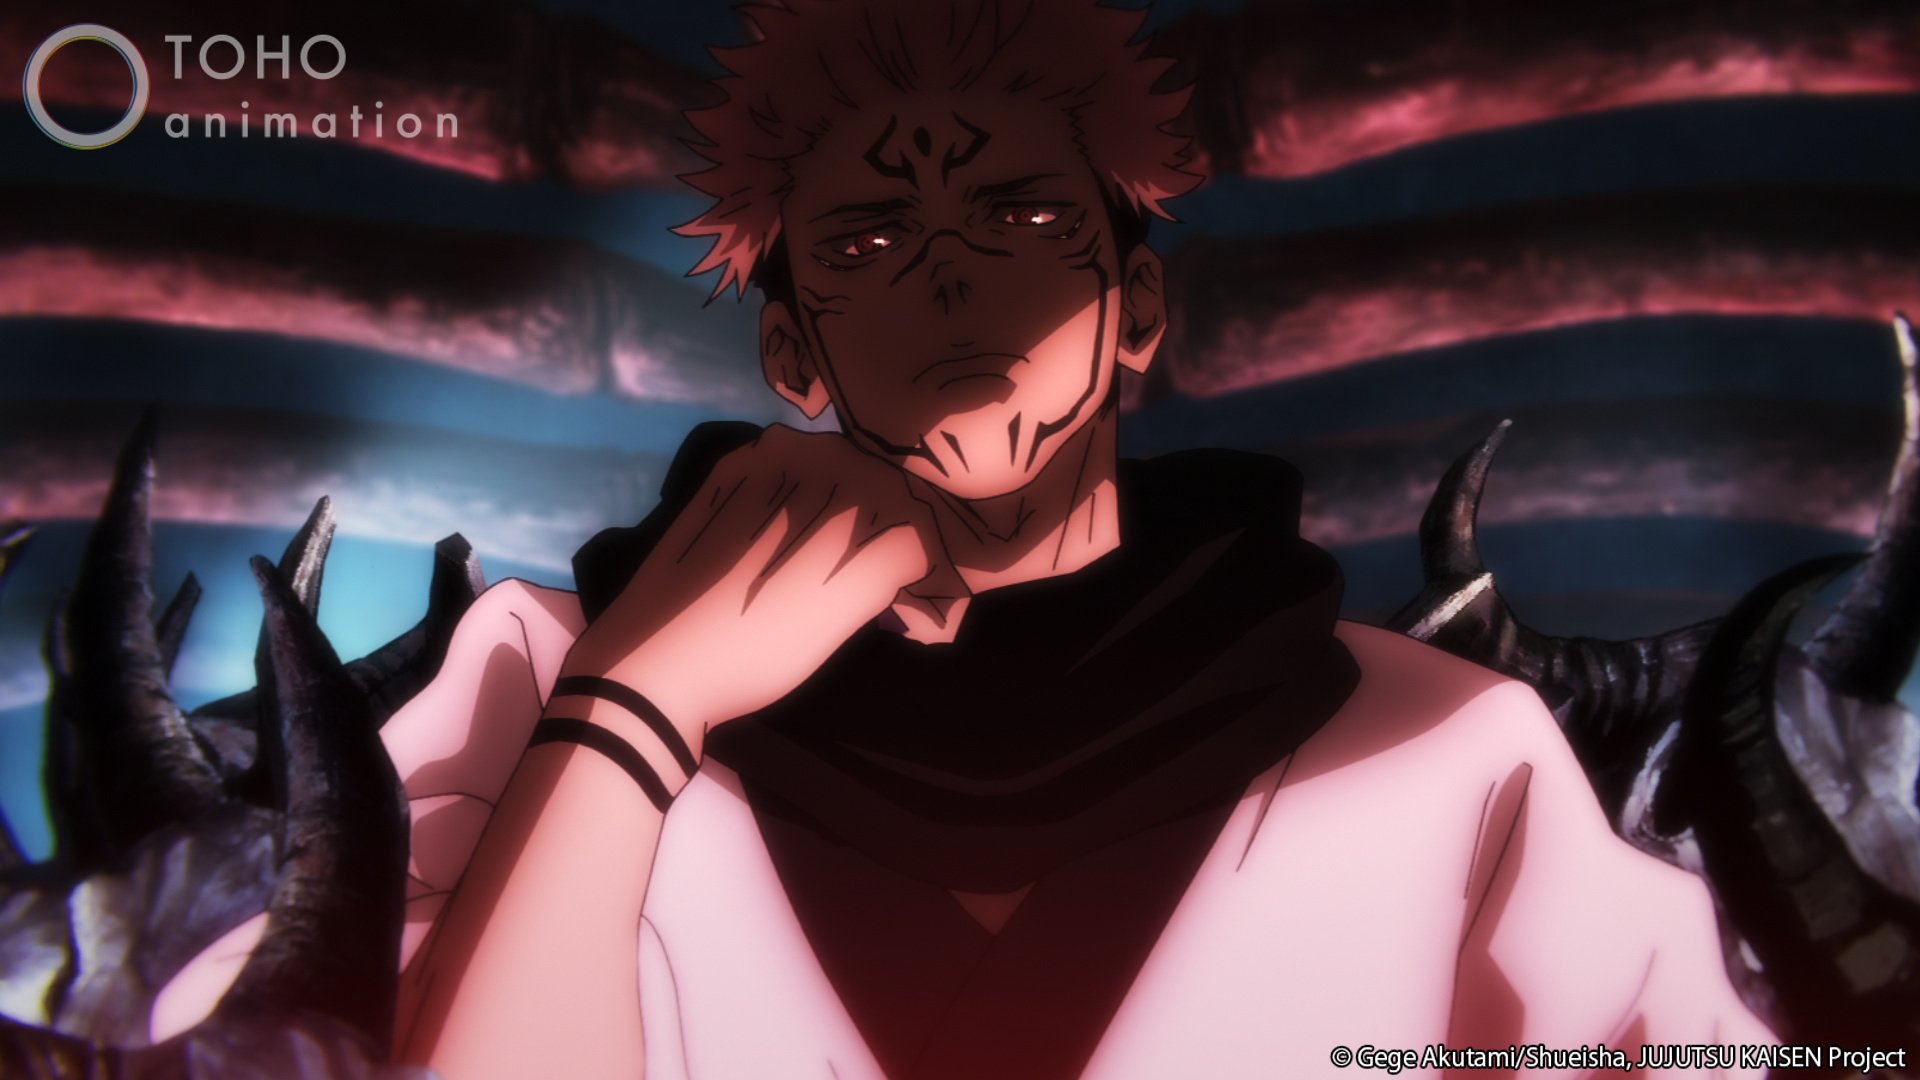 Sukuna in 'Jujutsu Kaisen' for our list of horror anime. He's sitting on a throne and resting his chin on his fist.